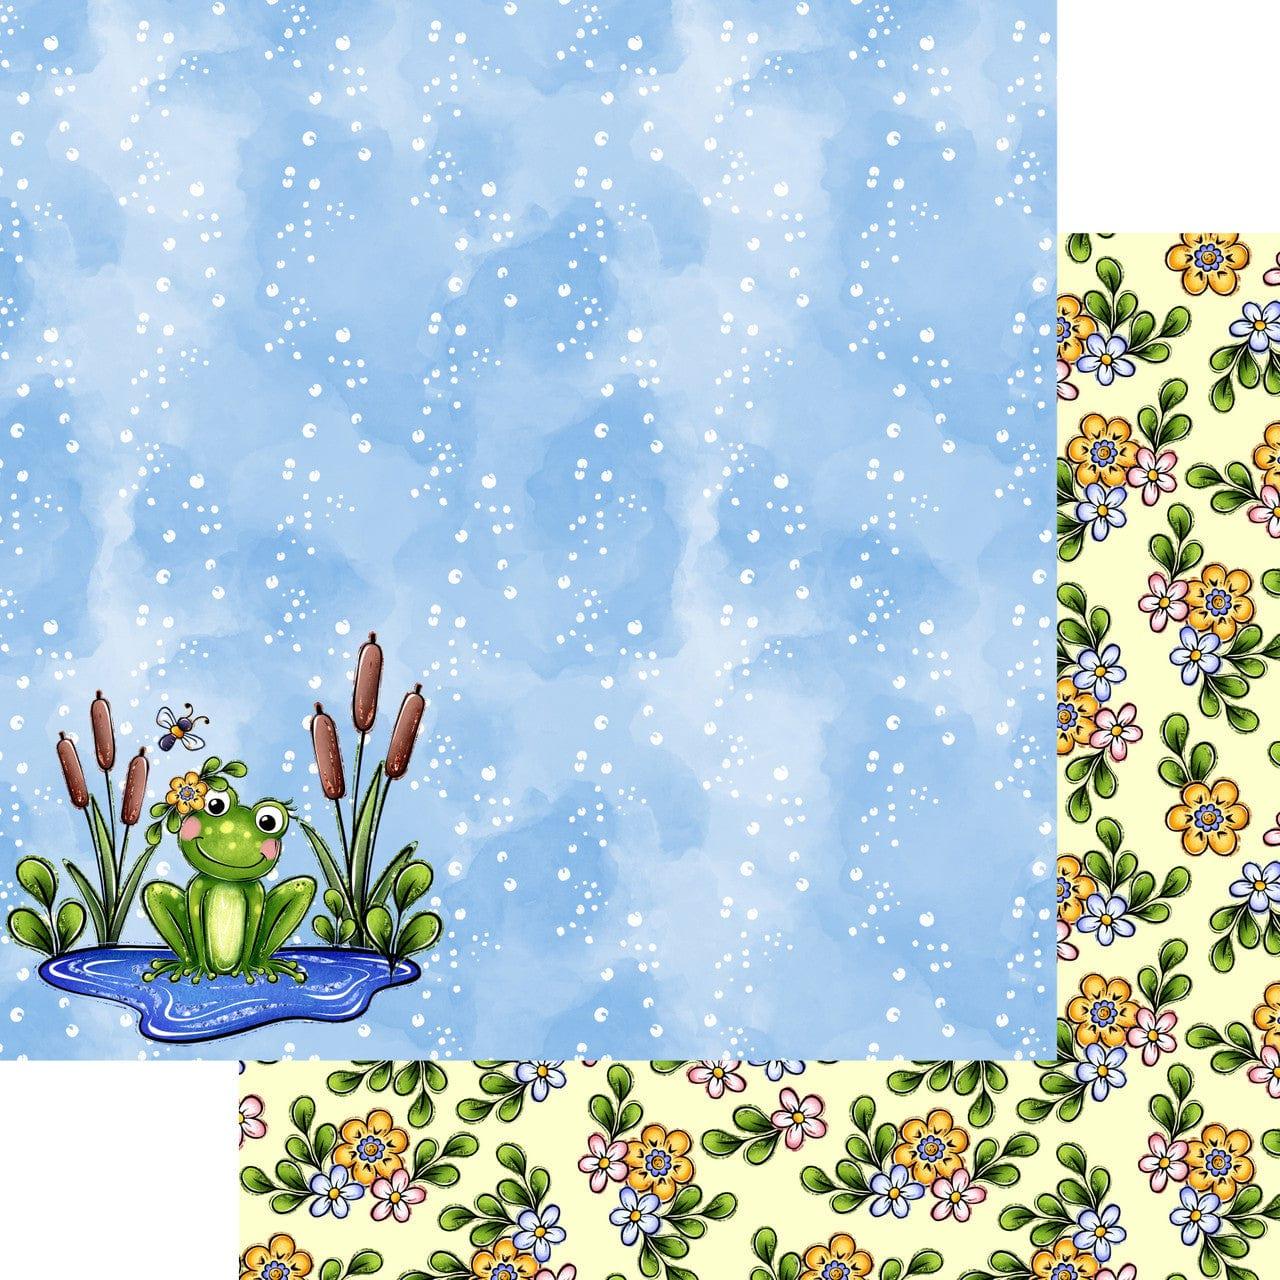  Frogs In The Morass 12 x 12 Scrapbook Paper & Embellishment Kit by SSC Designs - Scrapbook Supply Companies